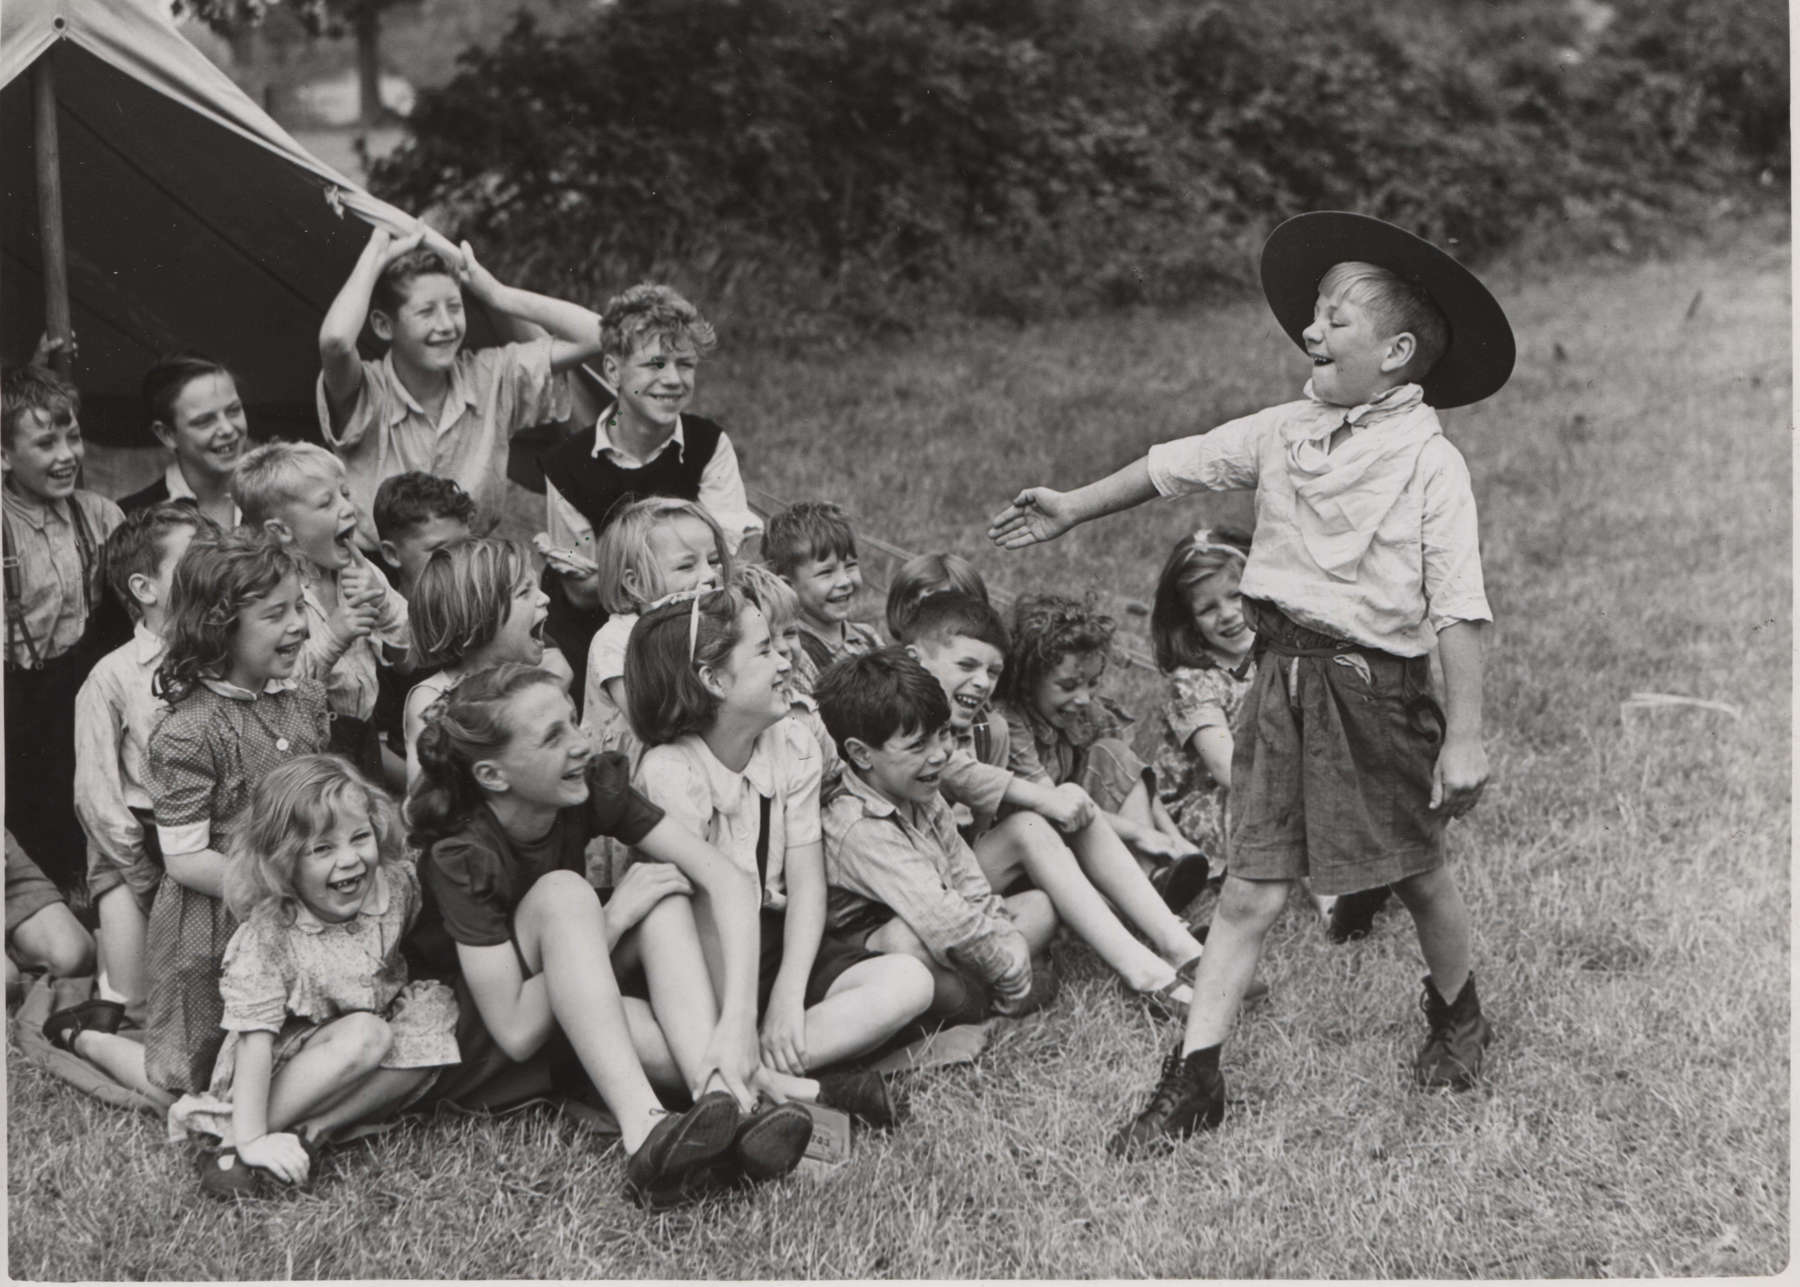 Black and white photo of a young person in Scouts uniform talking to a group of young people sitting down in front of a tent